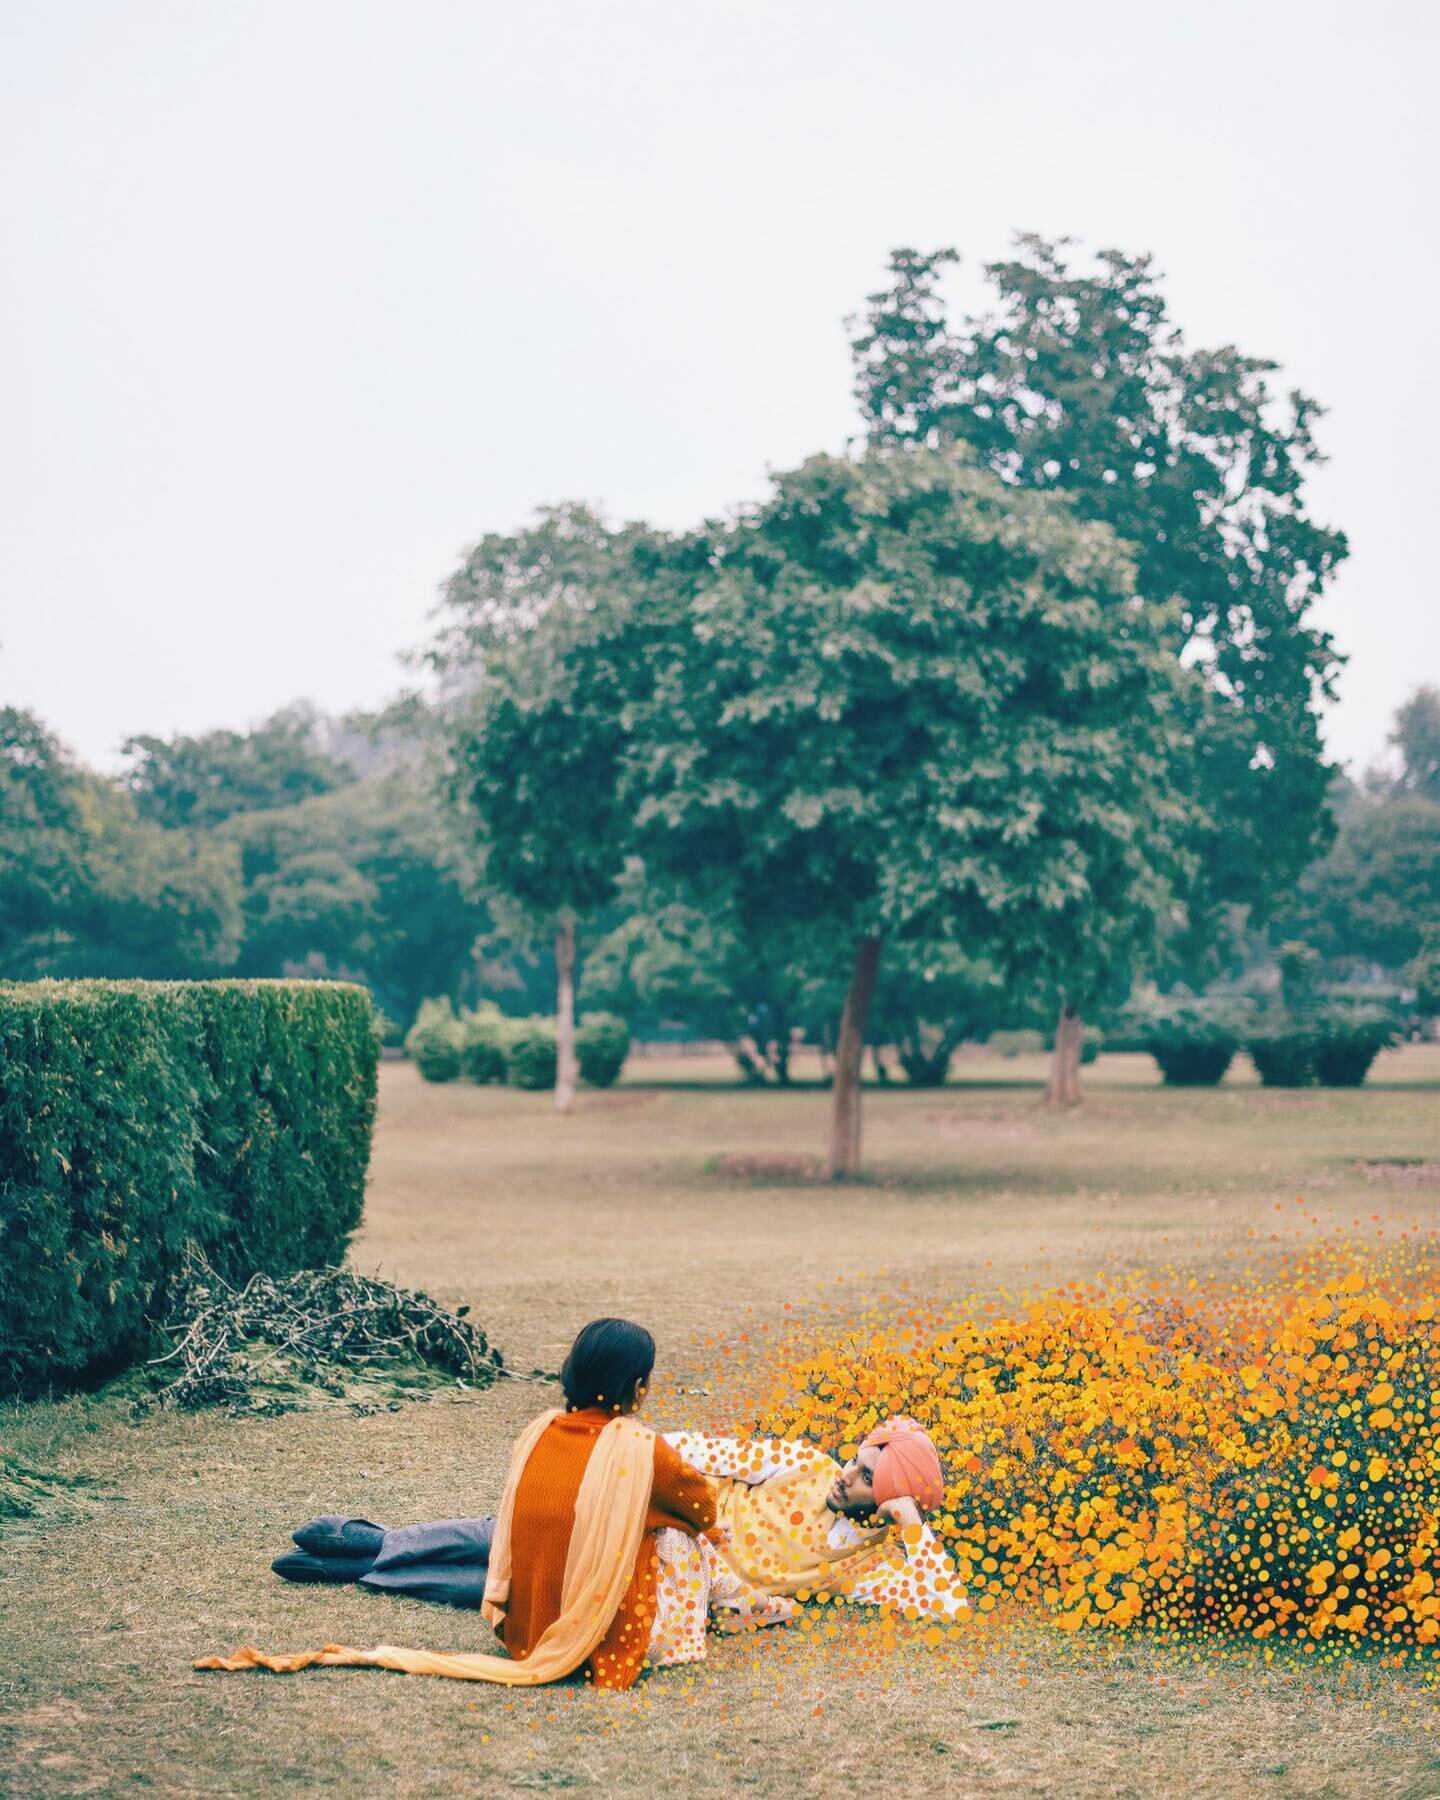 Our latest photo essay on the Monsoon Malabar Journal features a selection of painted photographs by @farheenay from her new series, 'Meet me in the garden&rsquo;. Inspired by her own family albums and scenes from everyday life, Farheen staged these 